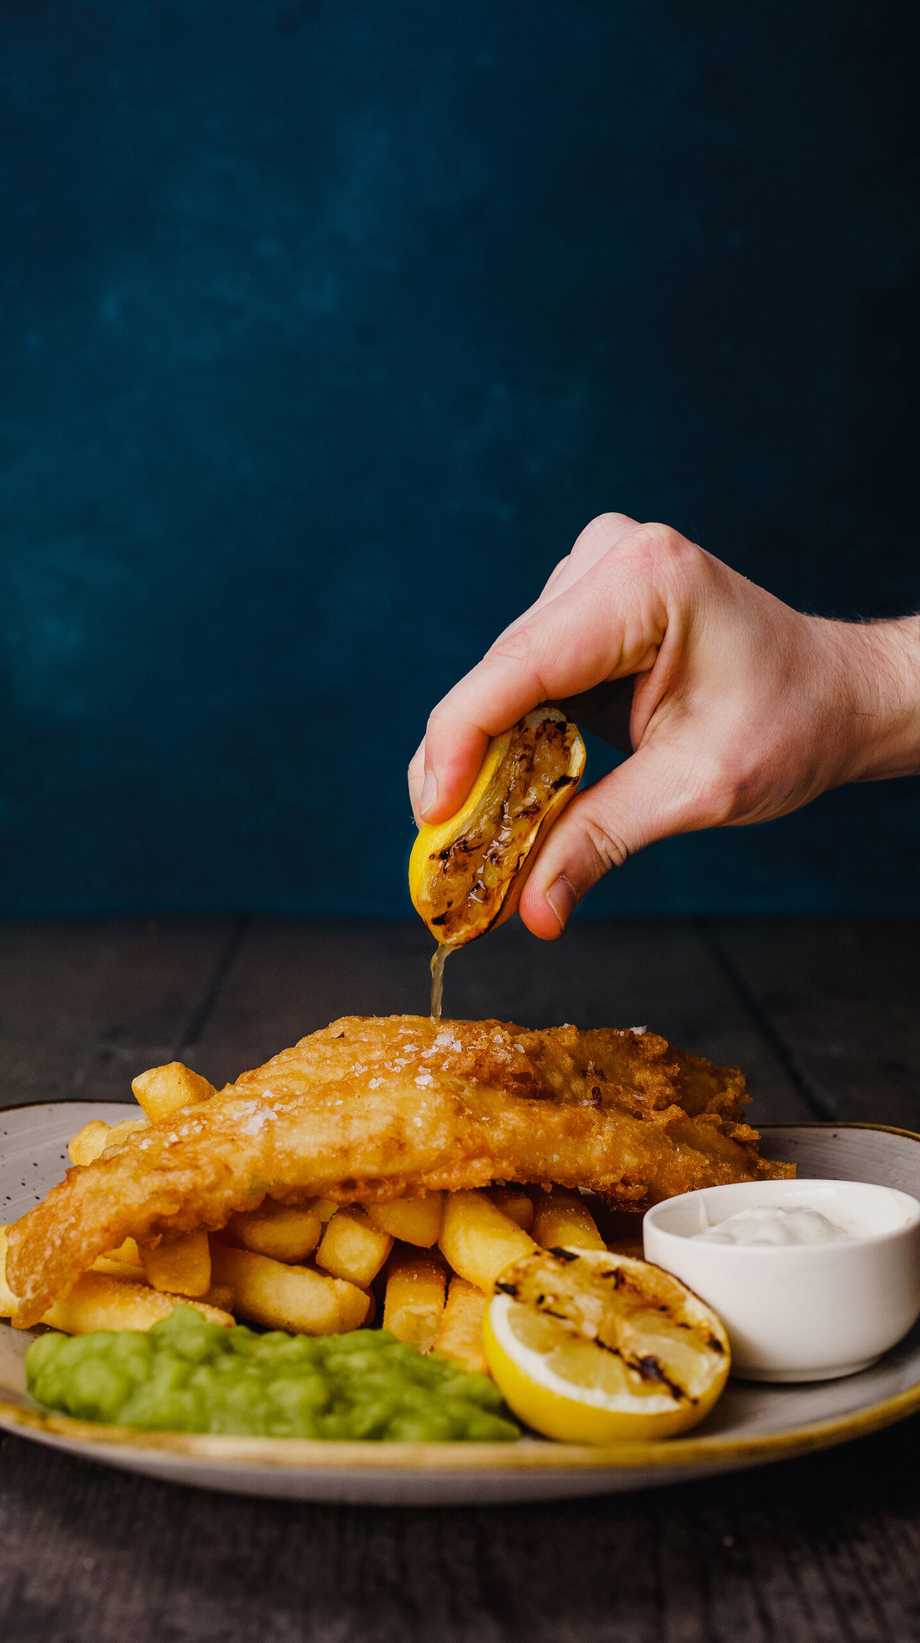 A hand squeezes fresh lemon over a plate of fish and chips, including mushy peas and tartar sauce.